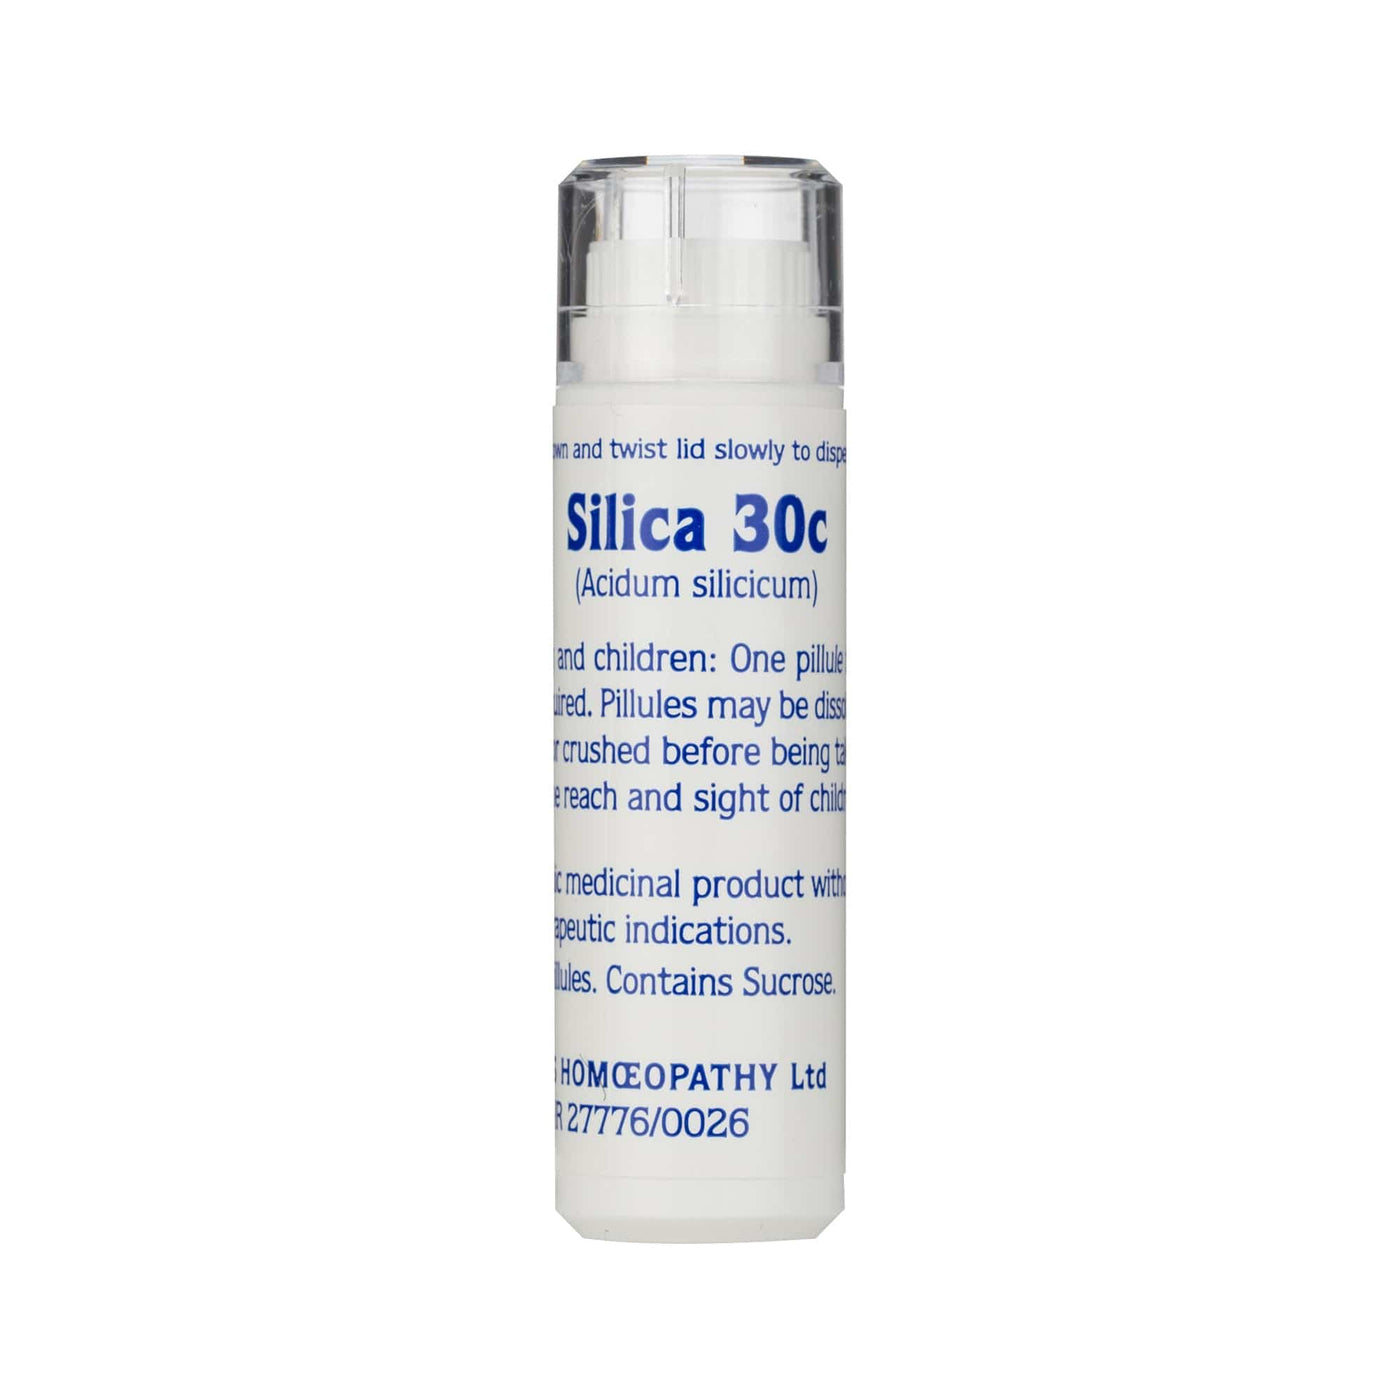 Neal's Yard Remedies Silica 30C Helios Homoeopathic Remedy - 100 Pills